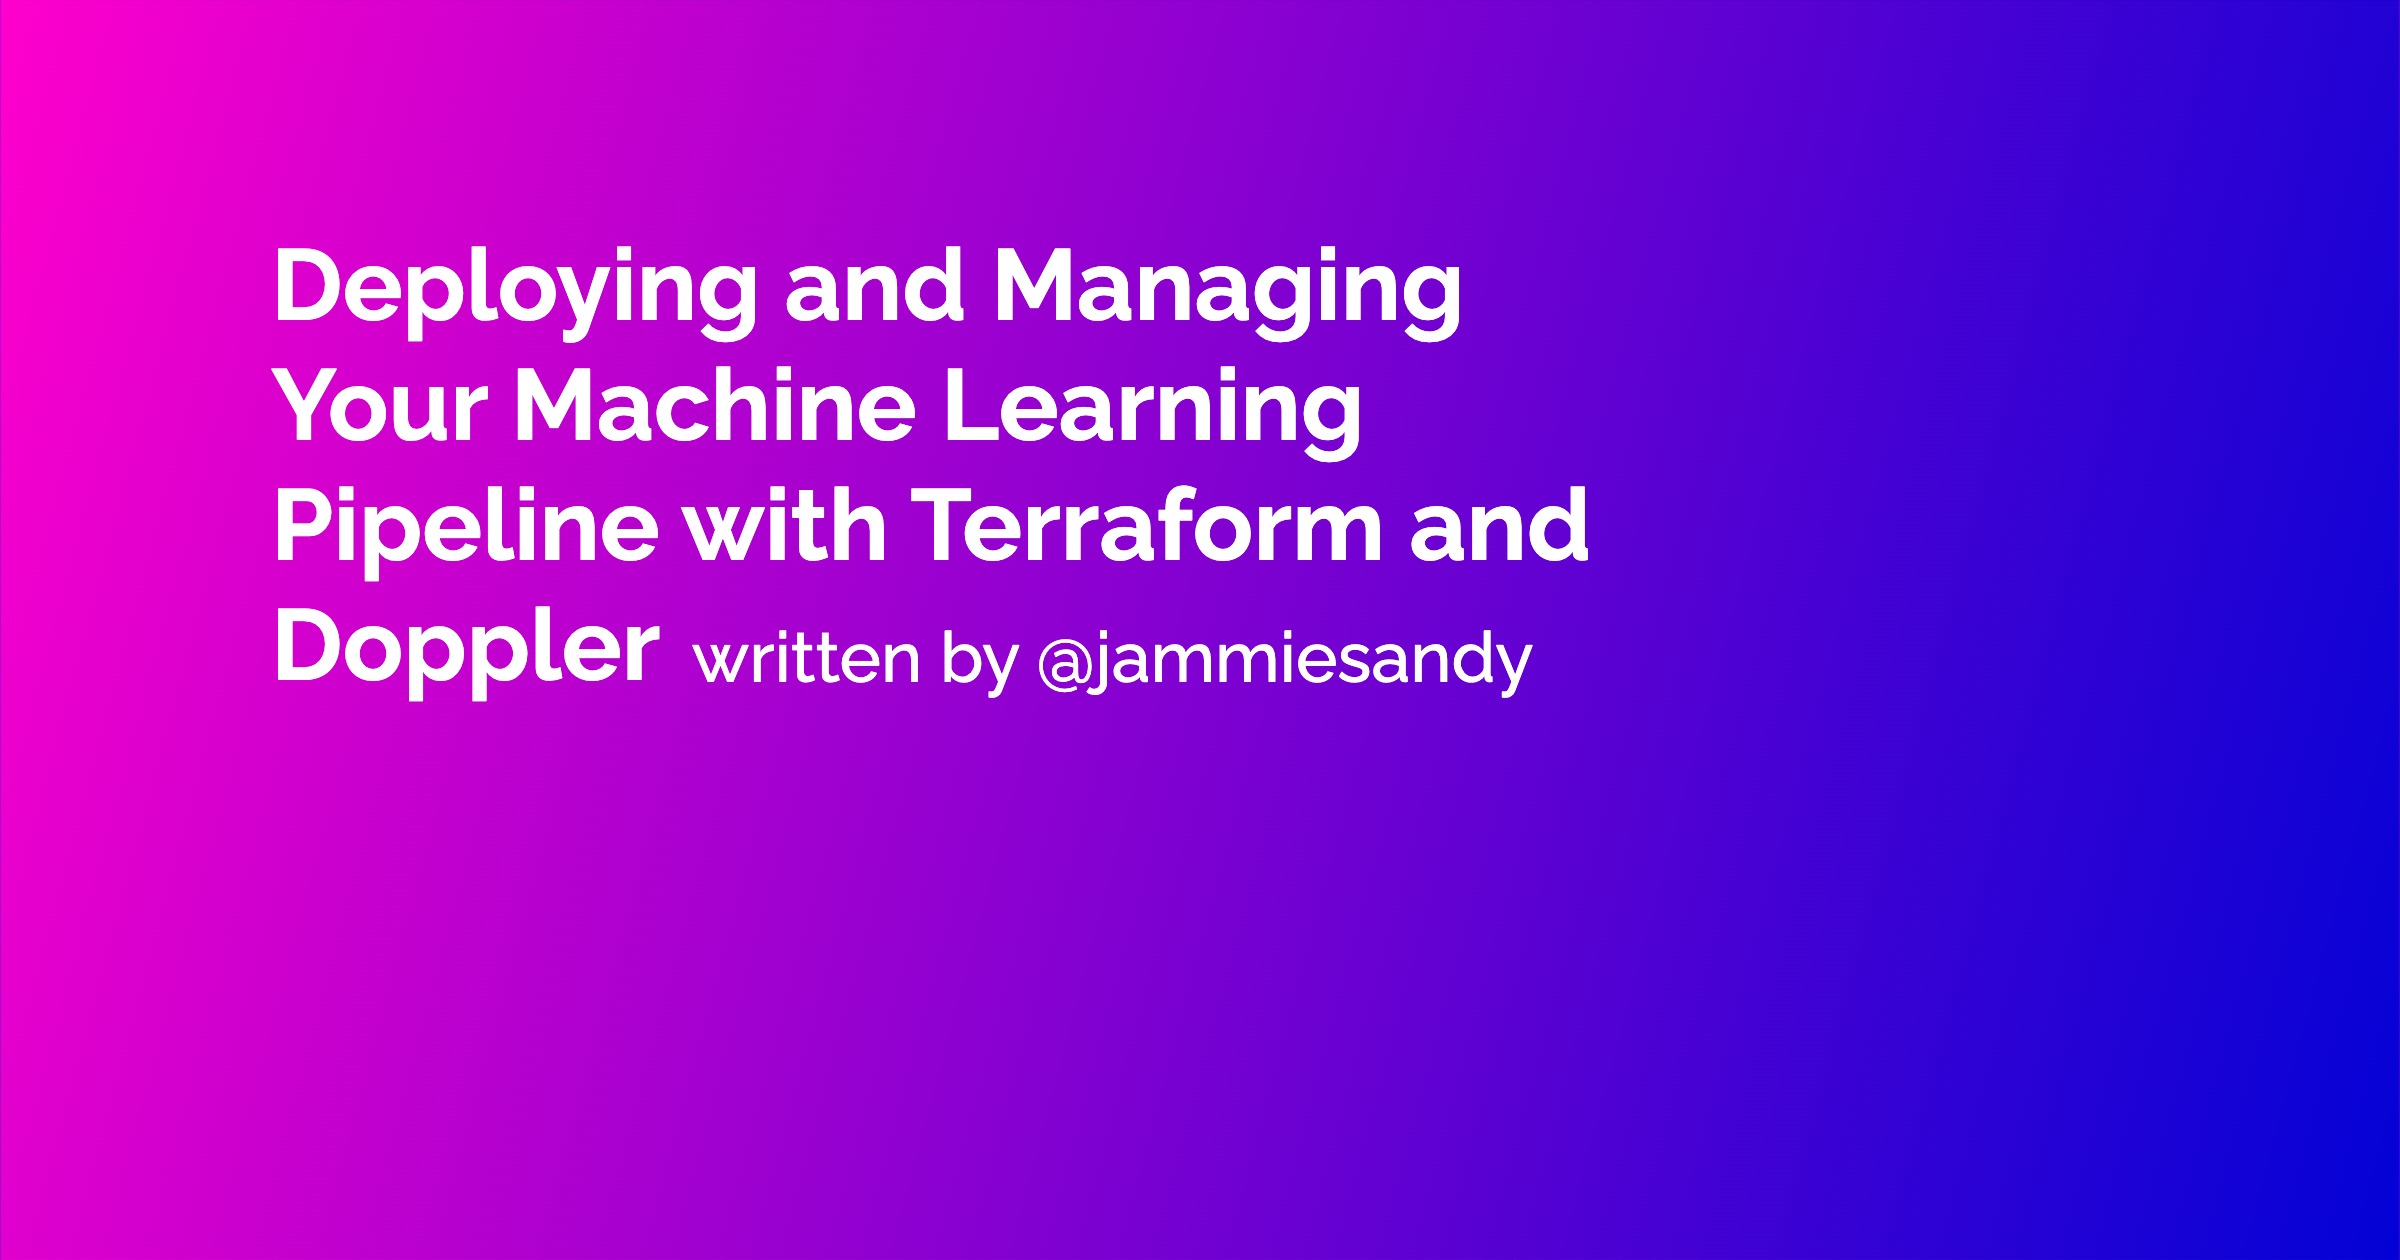 Deploying and Managing Your Machine Learning Pipeline with Terraform and Doppler